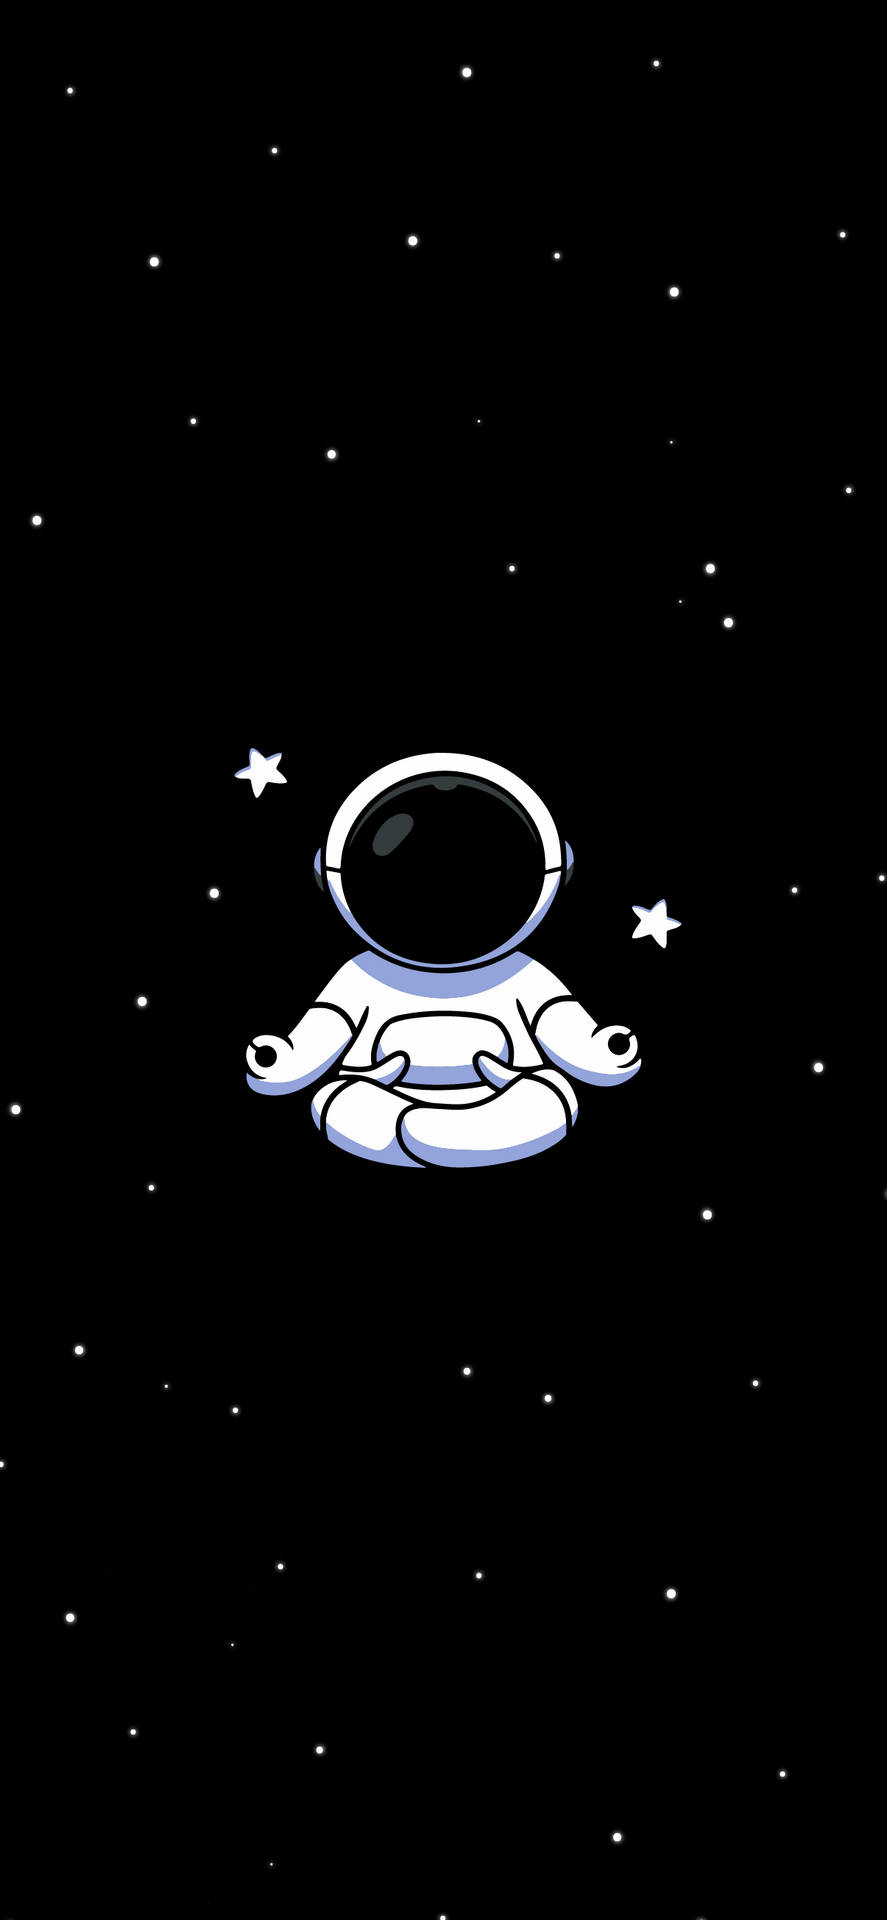 Black And White Astronaut Relaxing Yoga Wallpaper